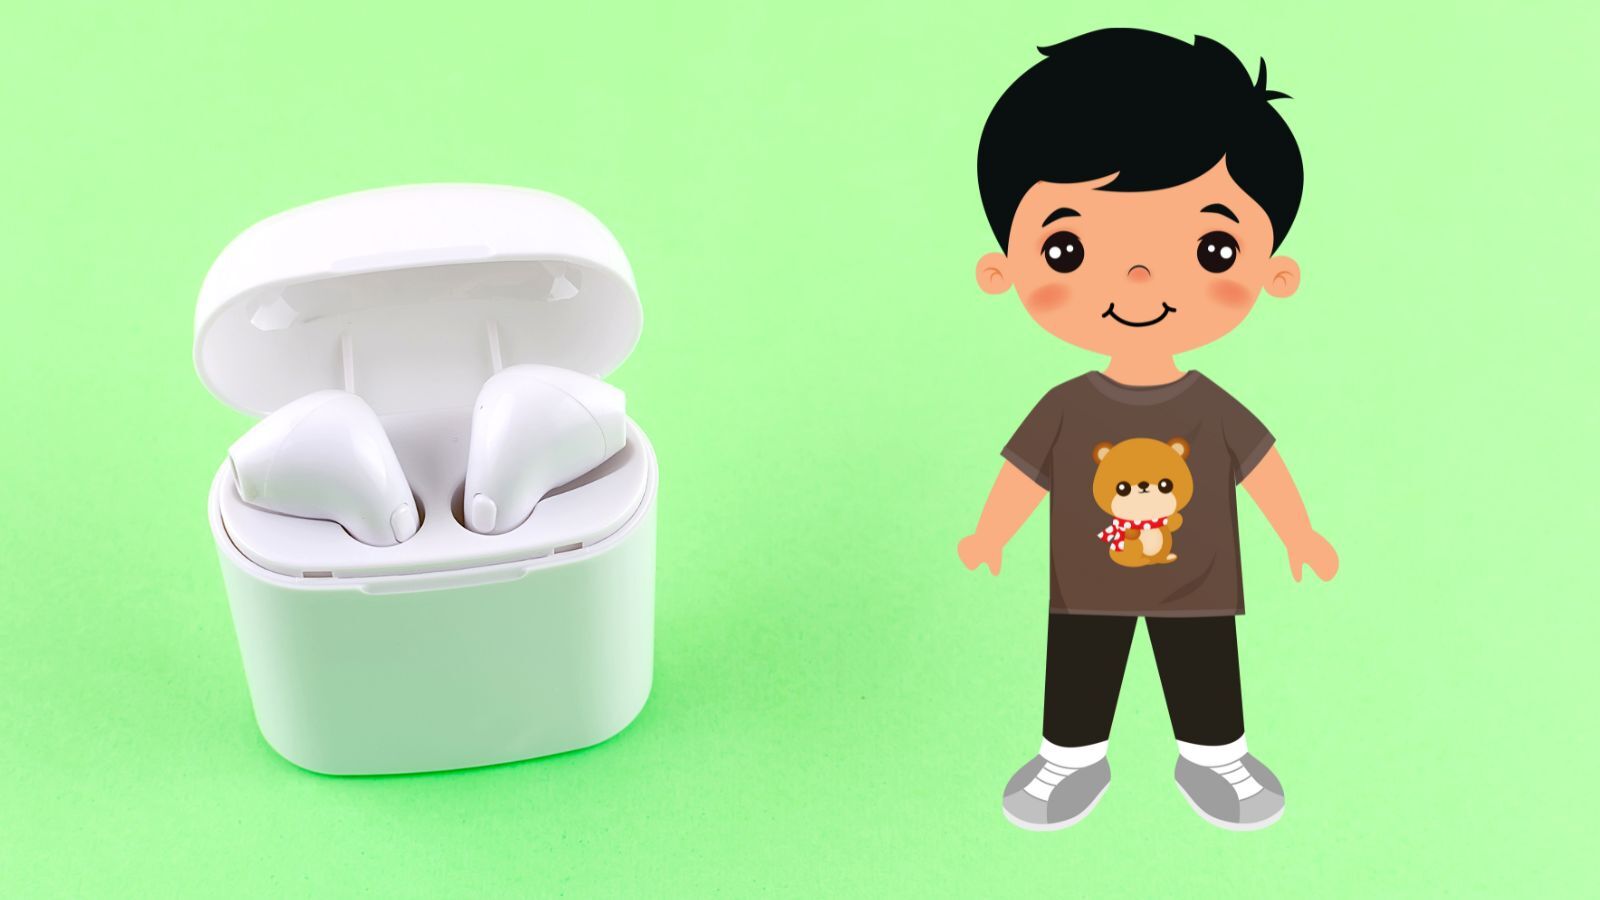 Airpods for Kids: How to Use Them Safely?